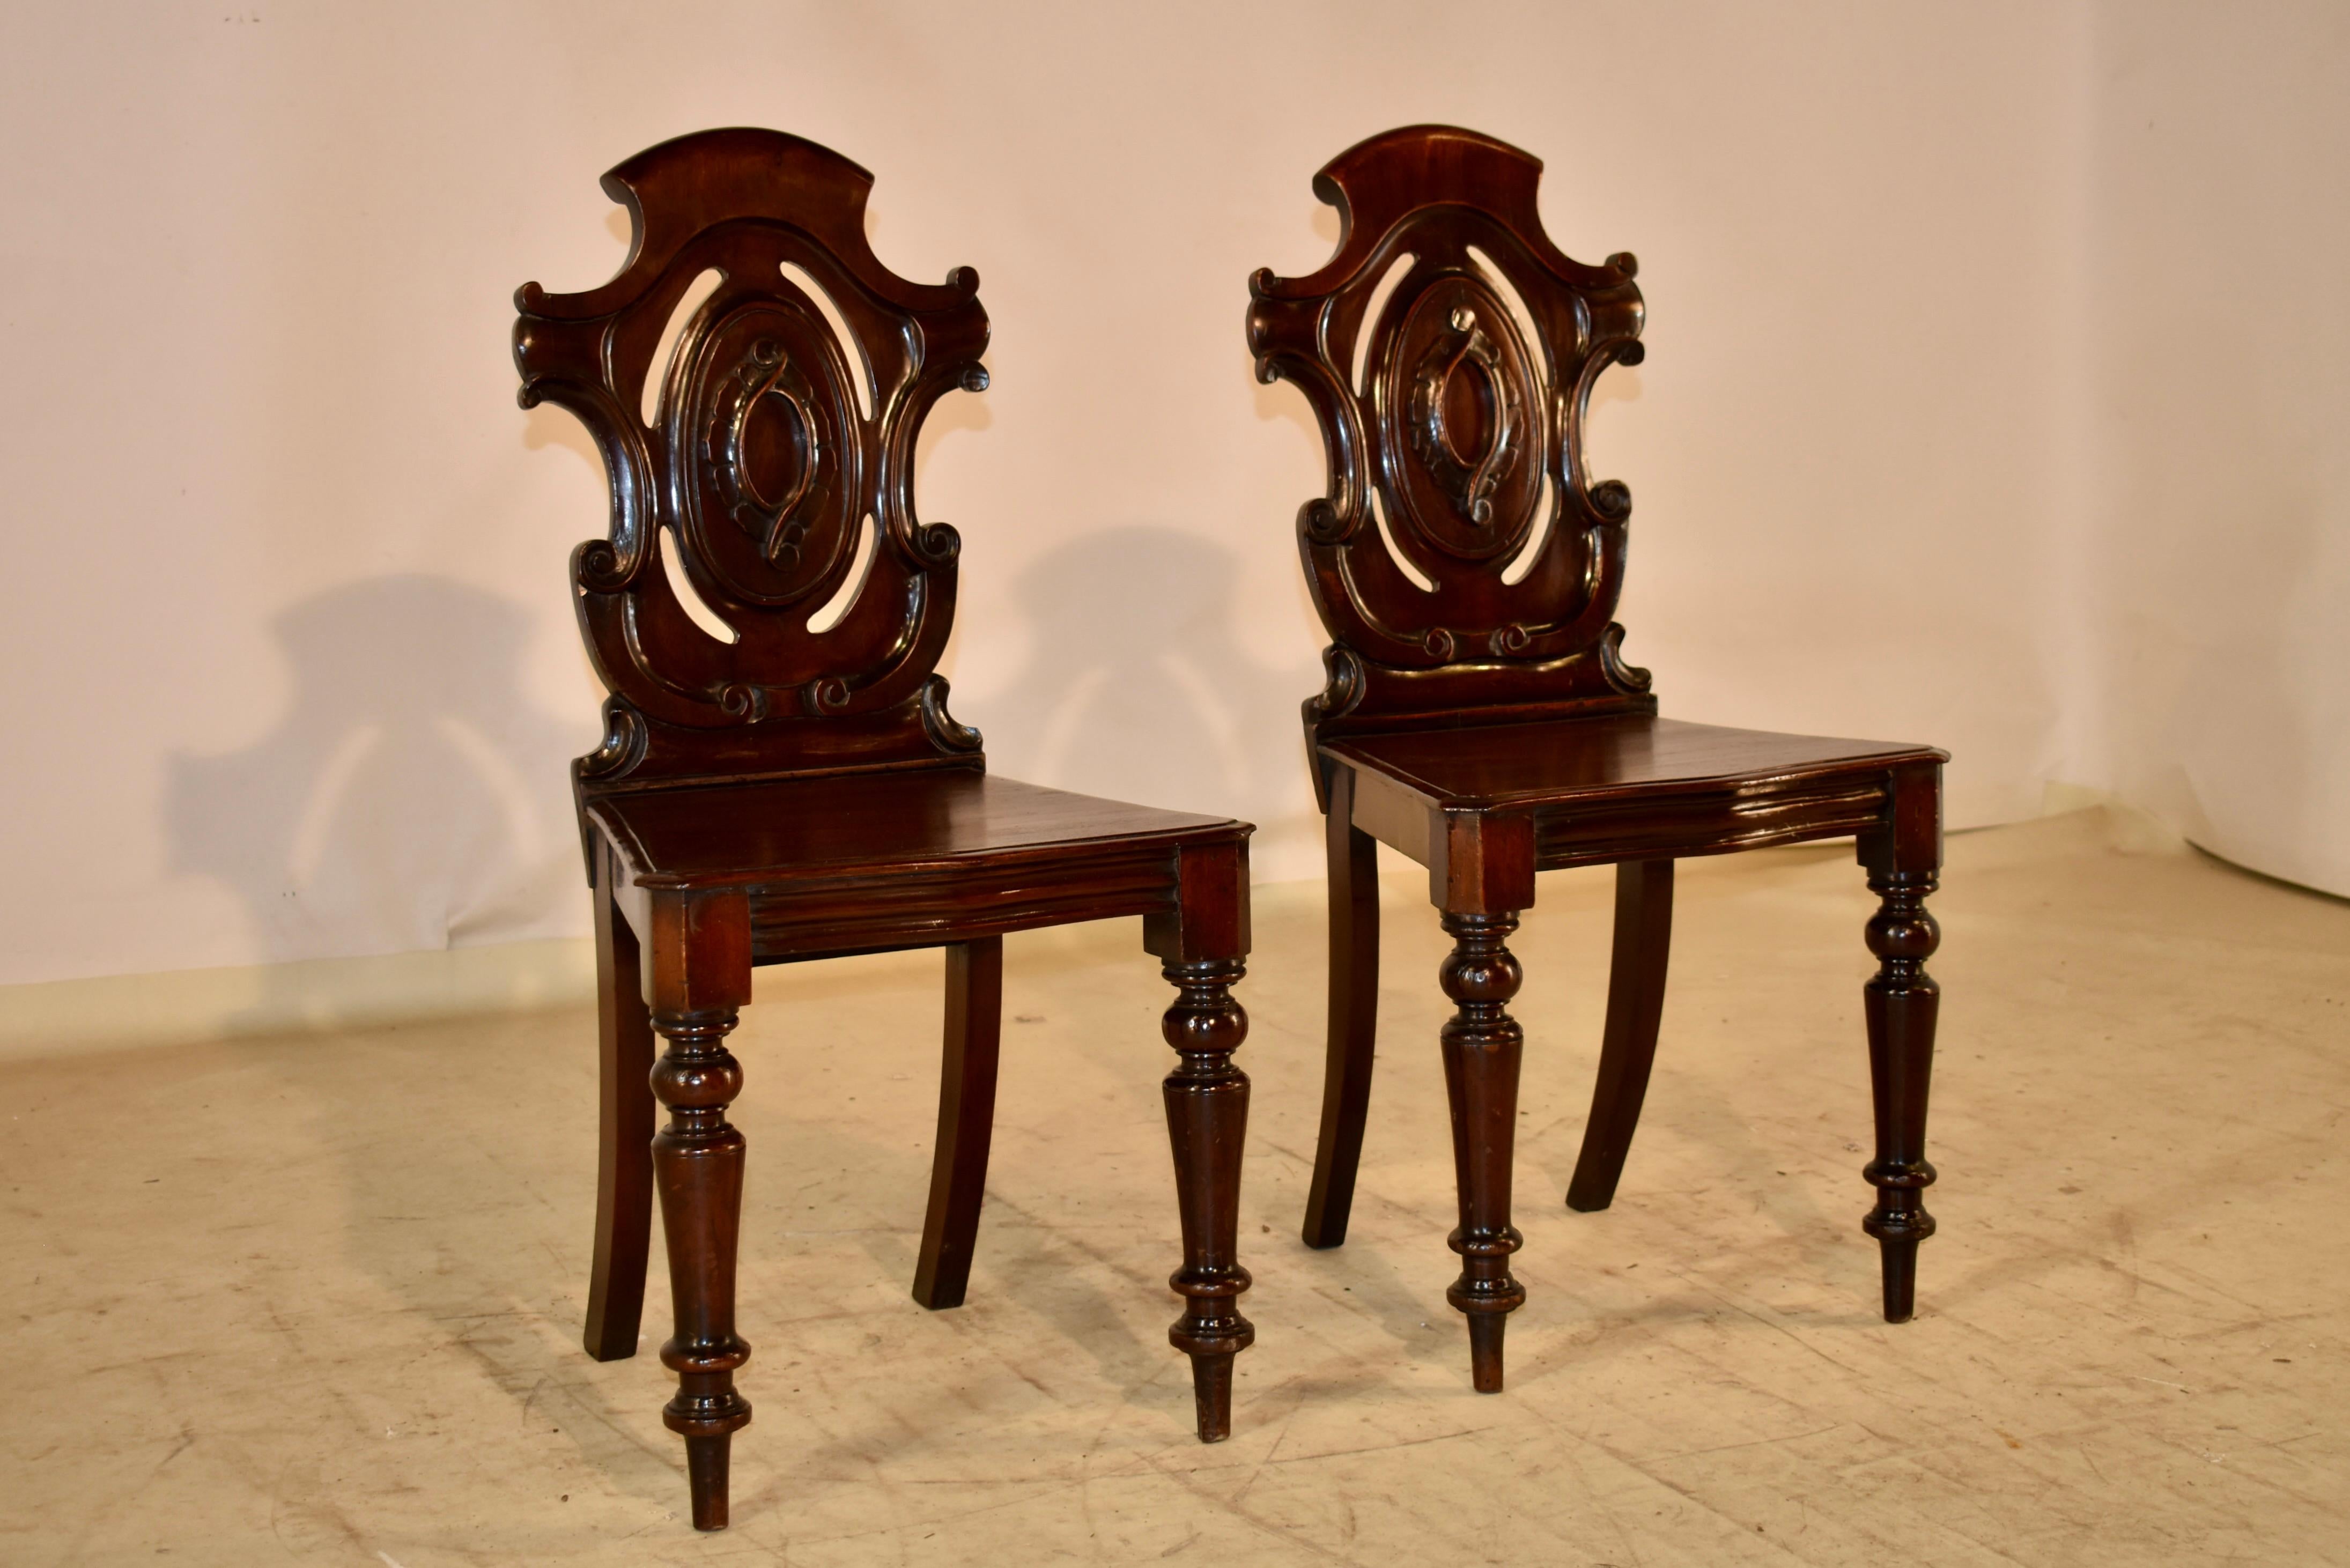 Pair of 19th century mahogany hall chairs from England.  The backs are in the shape of shields, which are pierced and have a central lozenge in the back with carved decoration.  The seats are also shaped like shields and the chairs are supported on